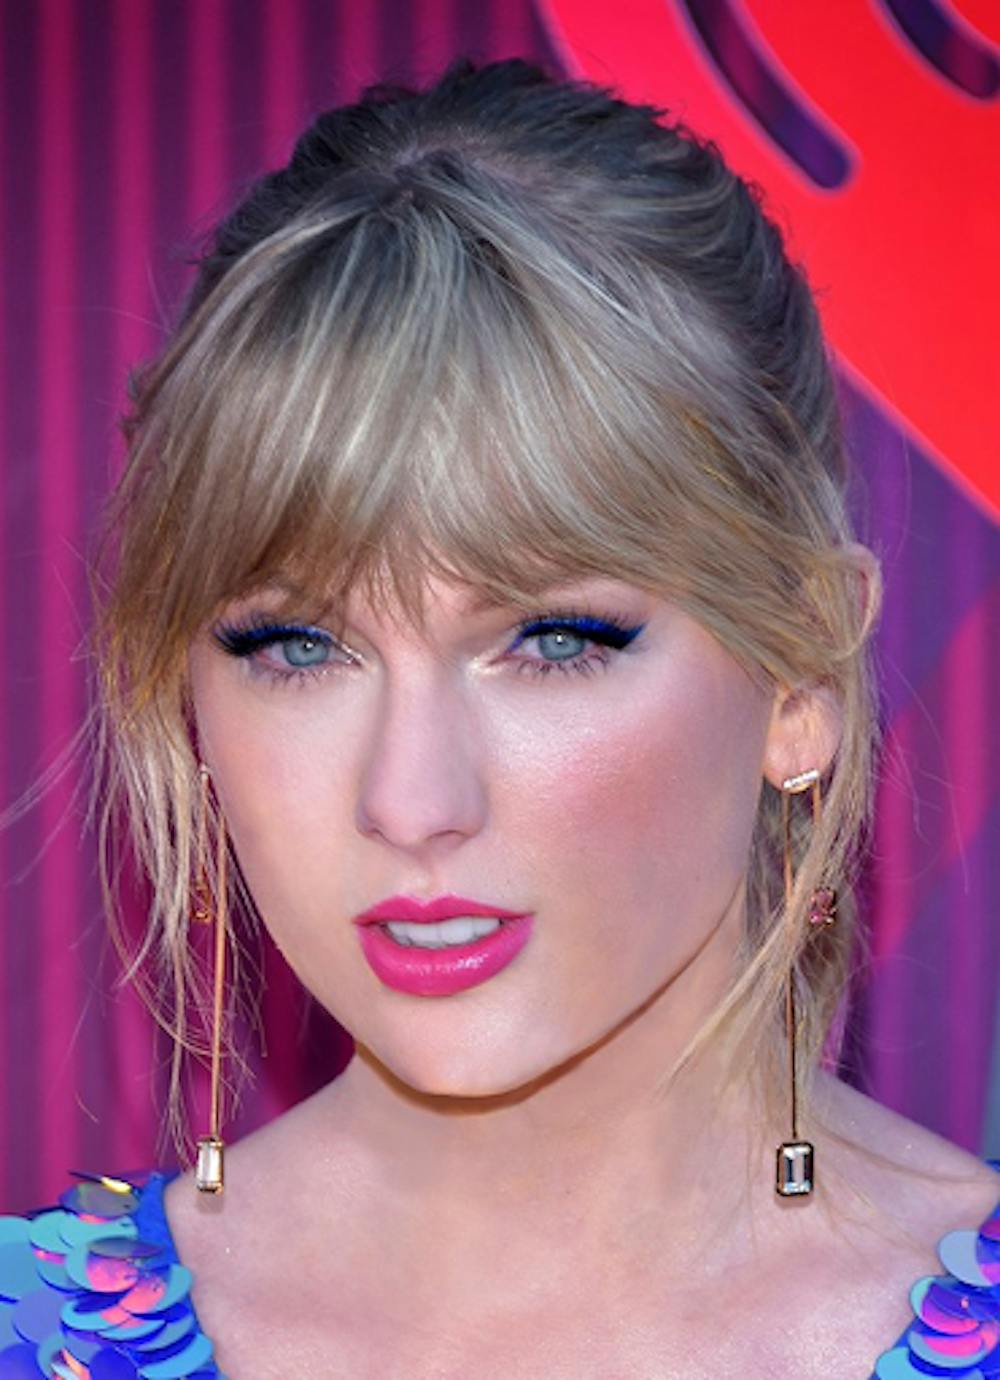 <p><em>Swift’s artistry seems to either attract or deter people. (Photo courtesy of </em><a href="https://commons.wikimedia.org/wiki/File:Taylor_Swift_2019_by_Glenn_Francis_(cropped).jpg" target=""><em>Wikimedia Commons</em></a><em> / Toglenn, March 14, 2019)</em></p>